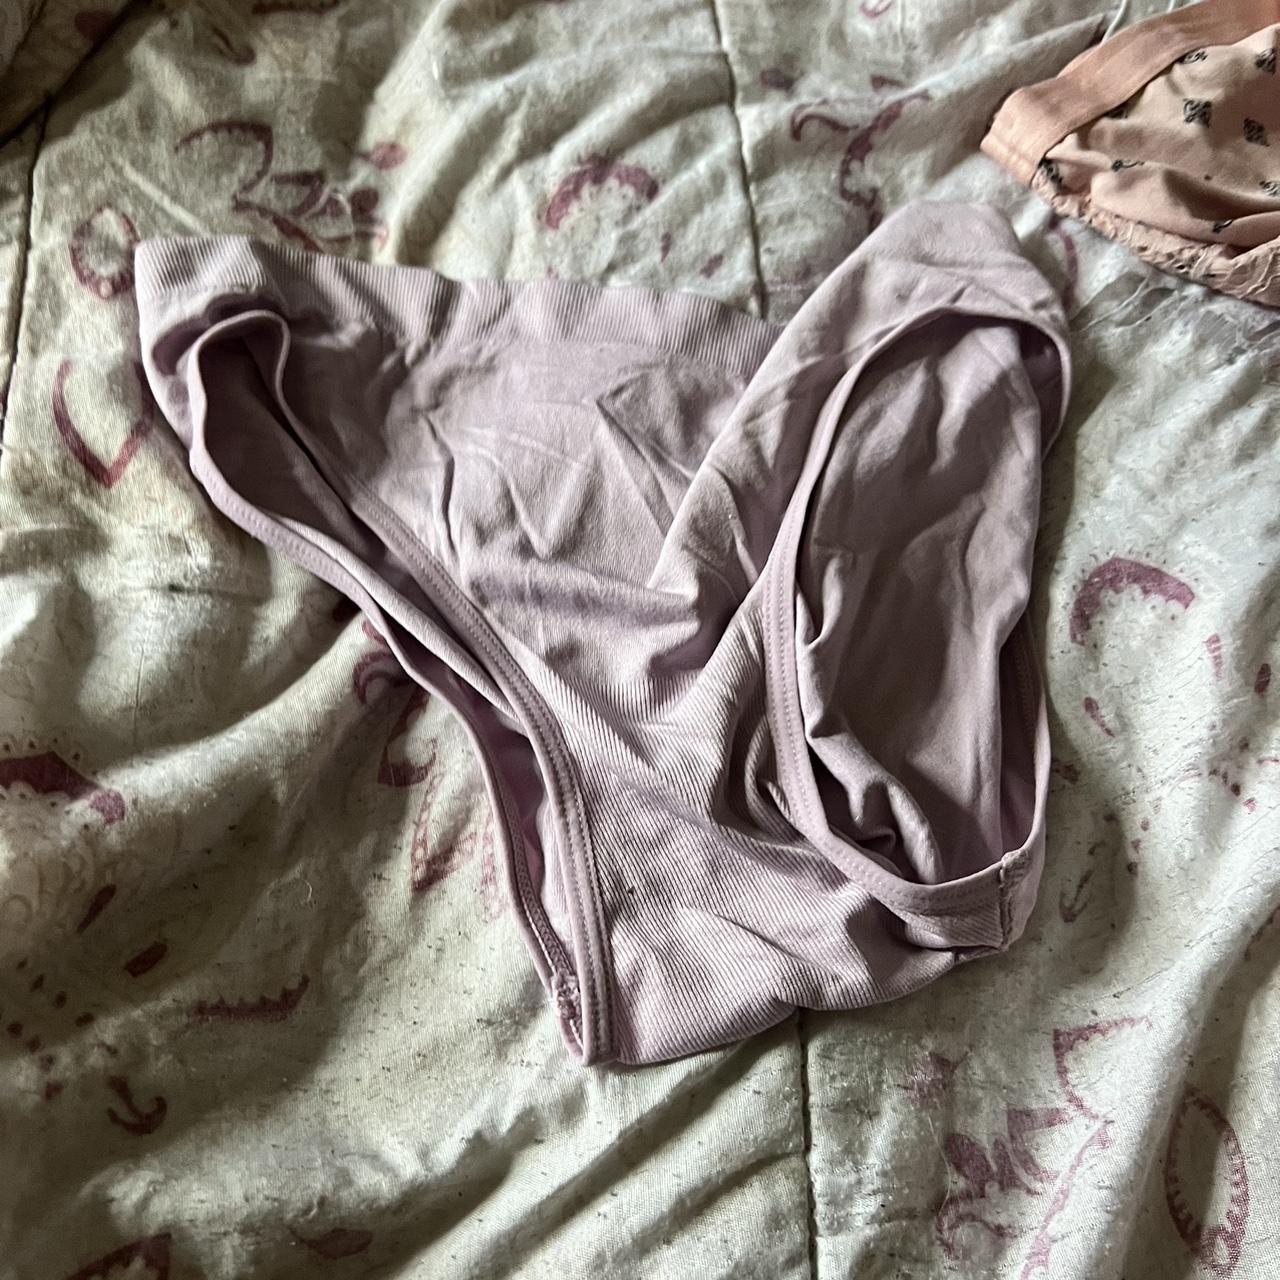 PANTIES !! They are sized between 1X and 2X - Depop